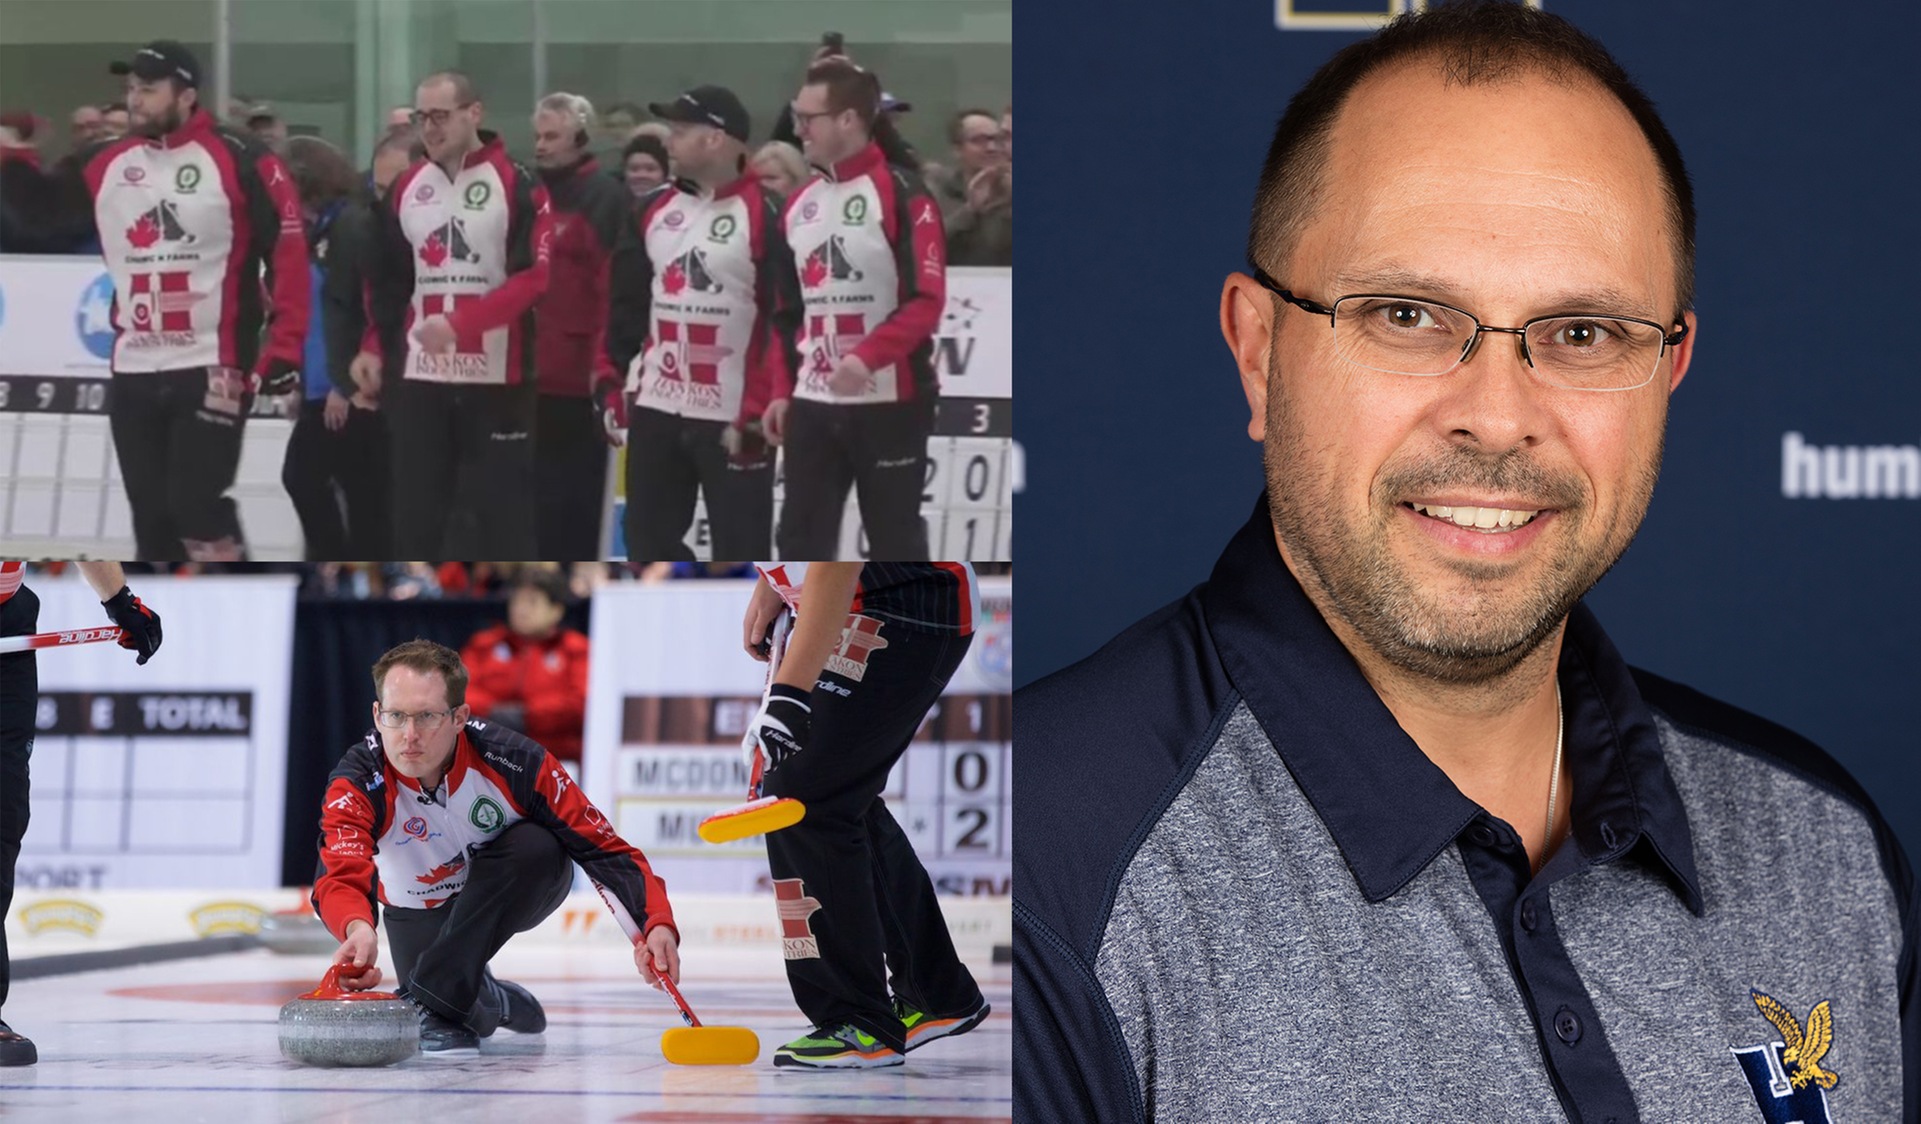 HAWKS TURRIFF COACHES TEAM MCDONALD TO ONTARIO TITLE & TRIP TO THE BRIER